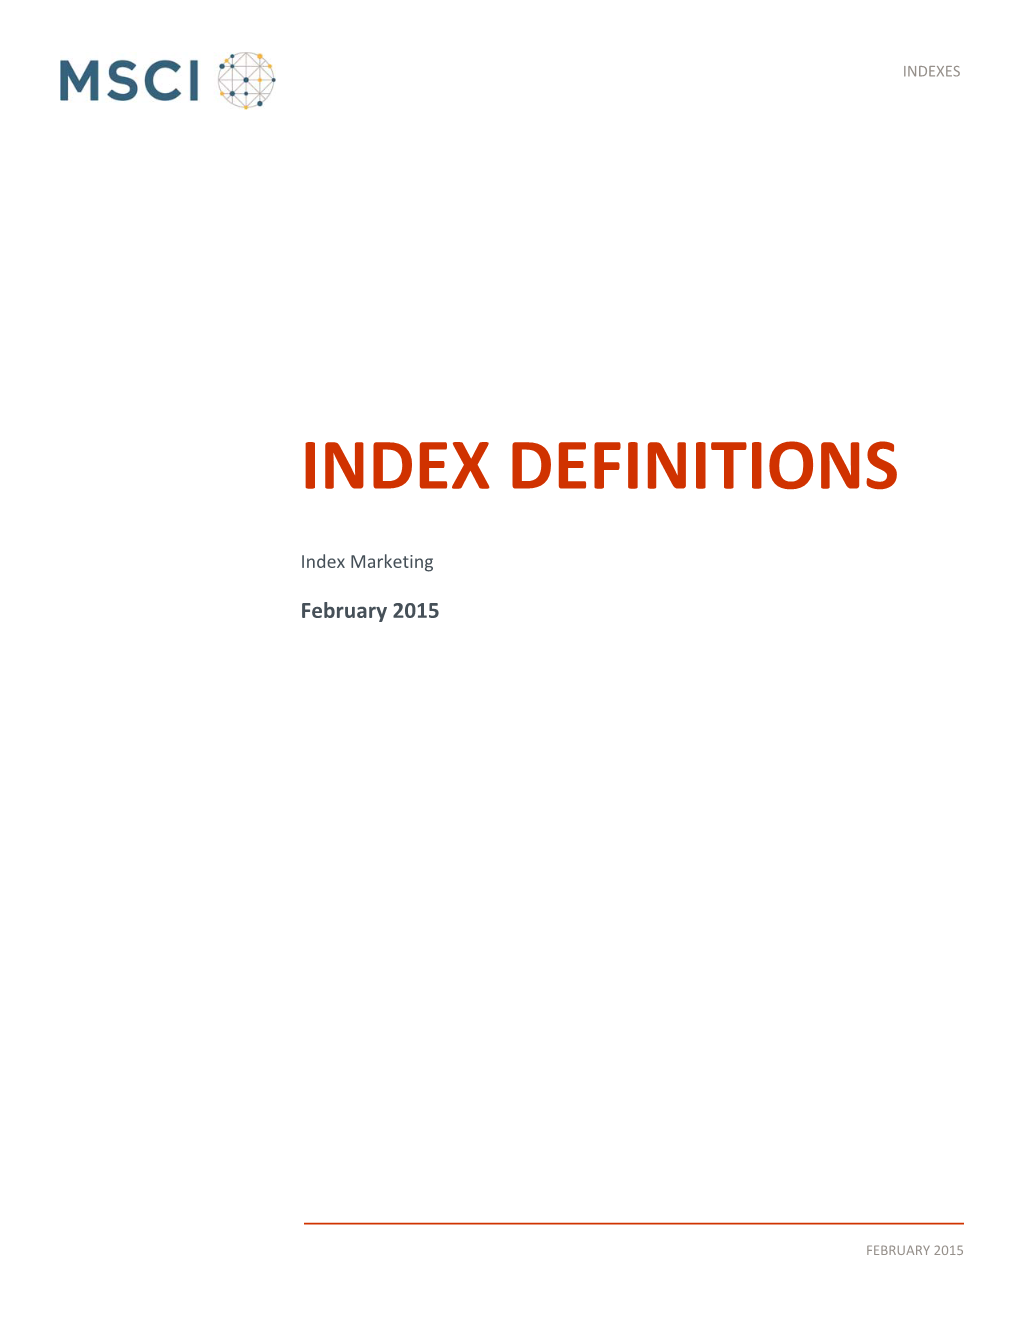 Index Definitions